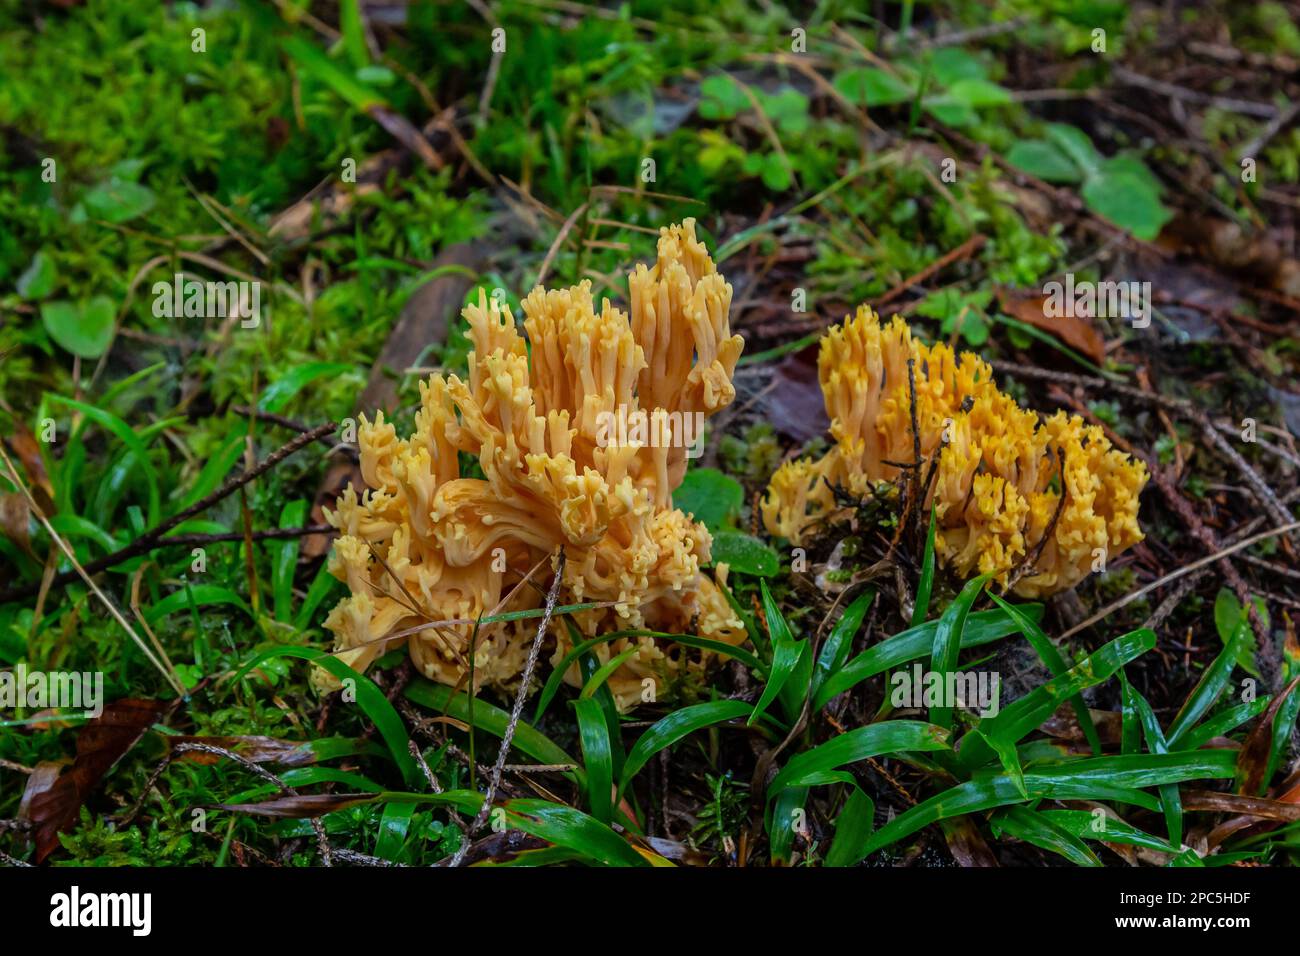 yellow edible coral mushroom Ramaria flava mushroom in the forest, close-up. Stock Photo